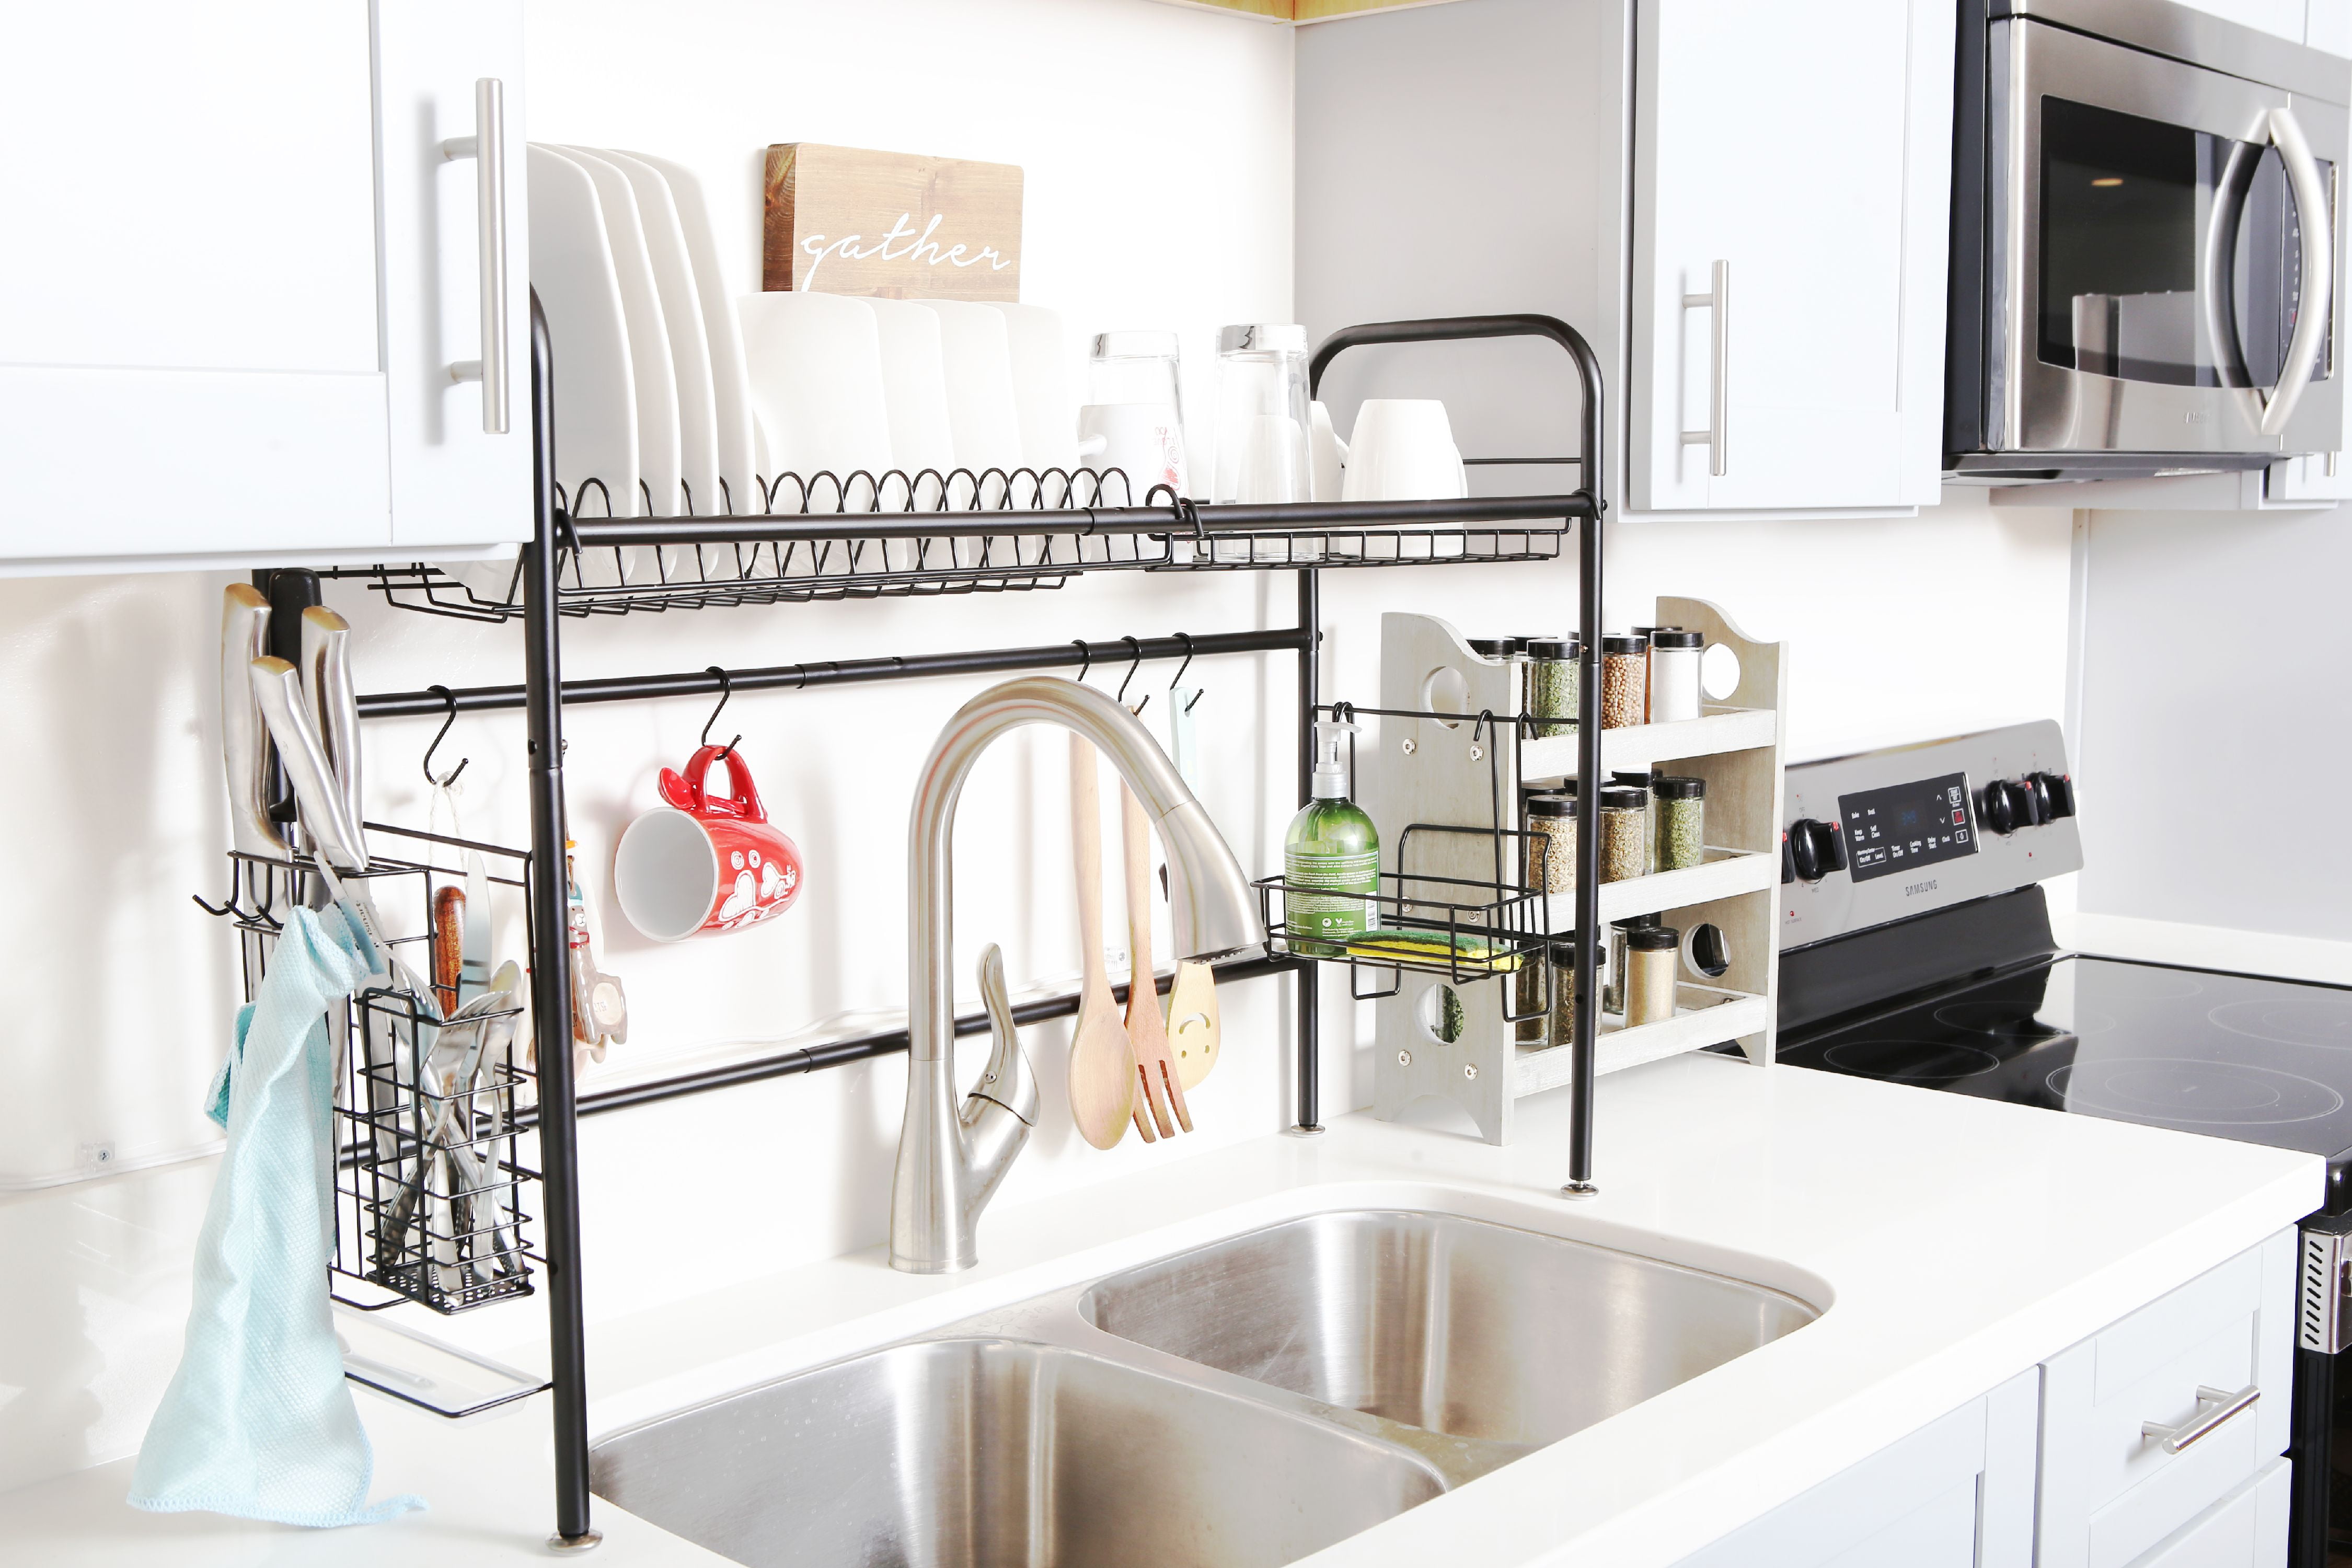 Design House Kitchen Sink Drying Rack in Stainless Steel